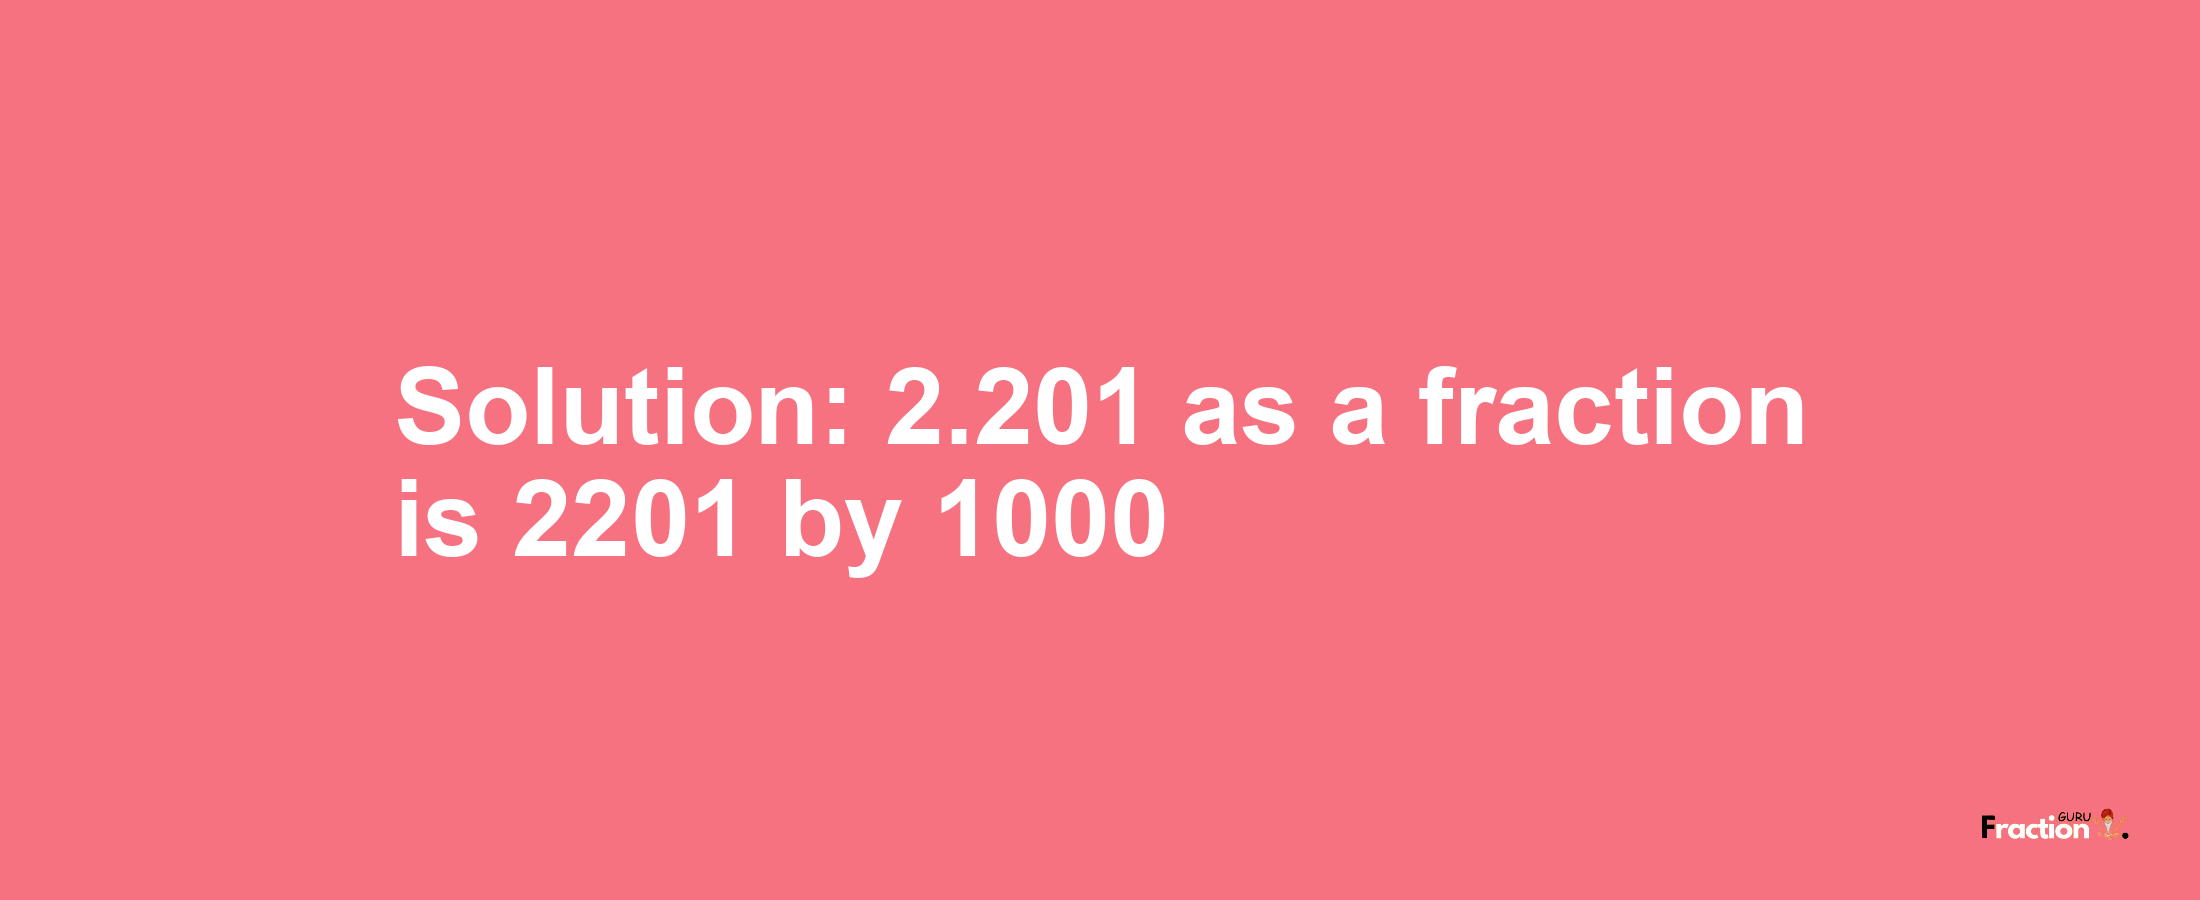 Solution:2.201 as a fraction is 2201/1000